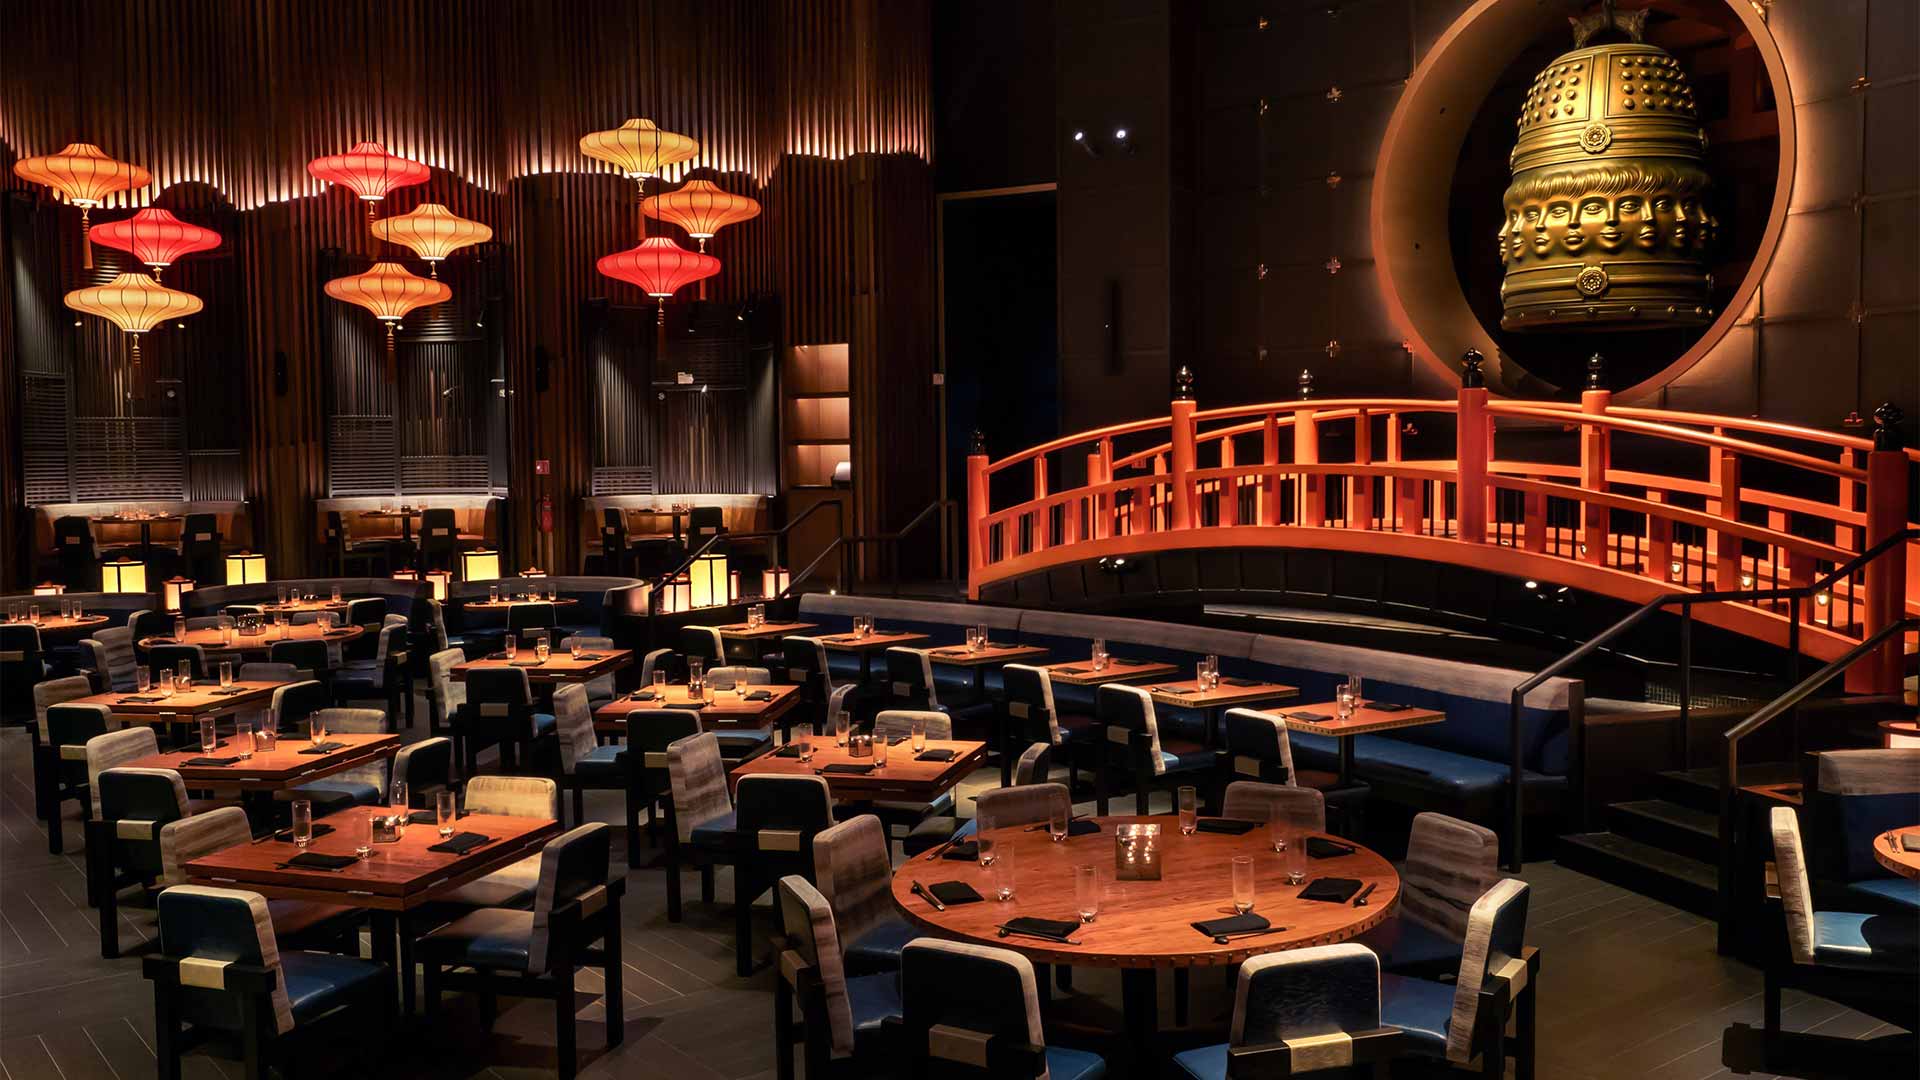 Main dining hall of KOMA Singapore, with reservations for private dining events